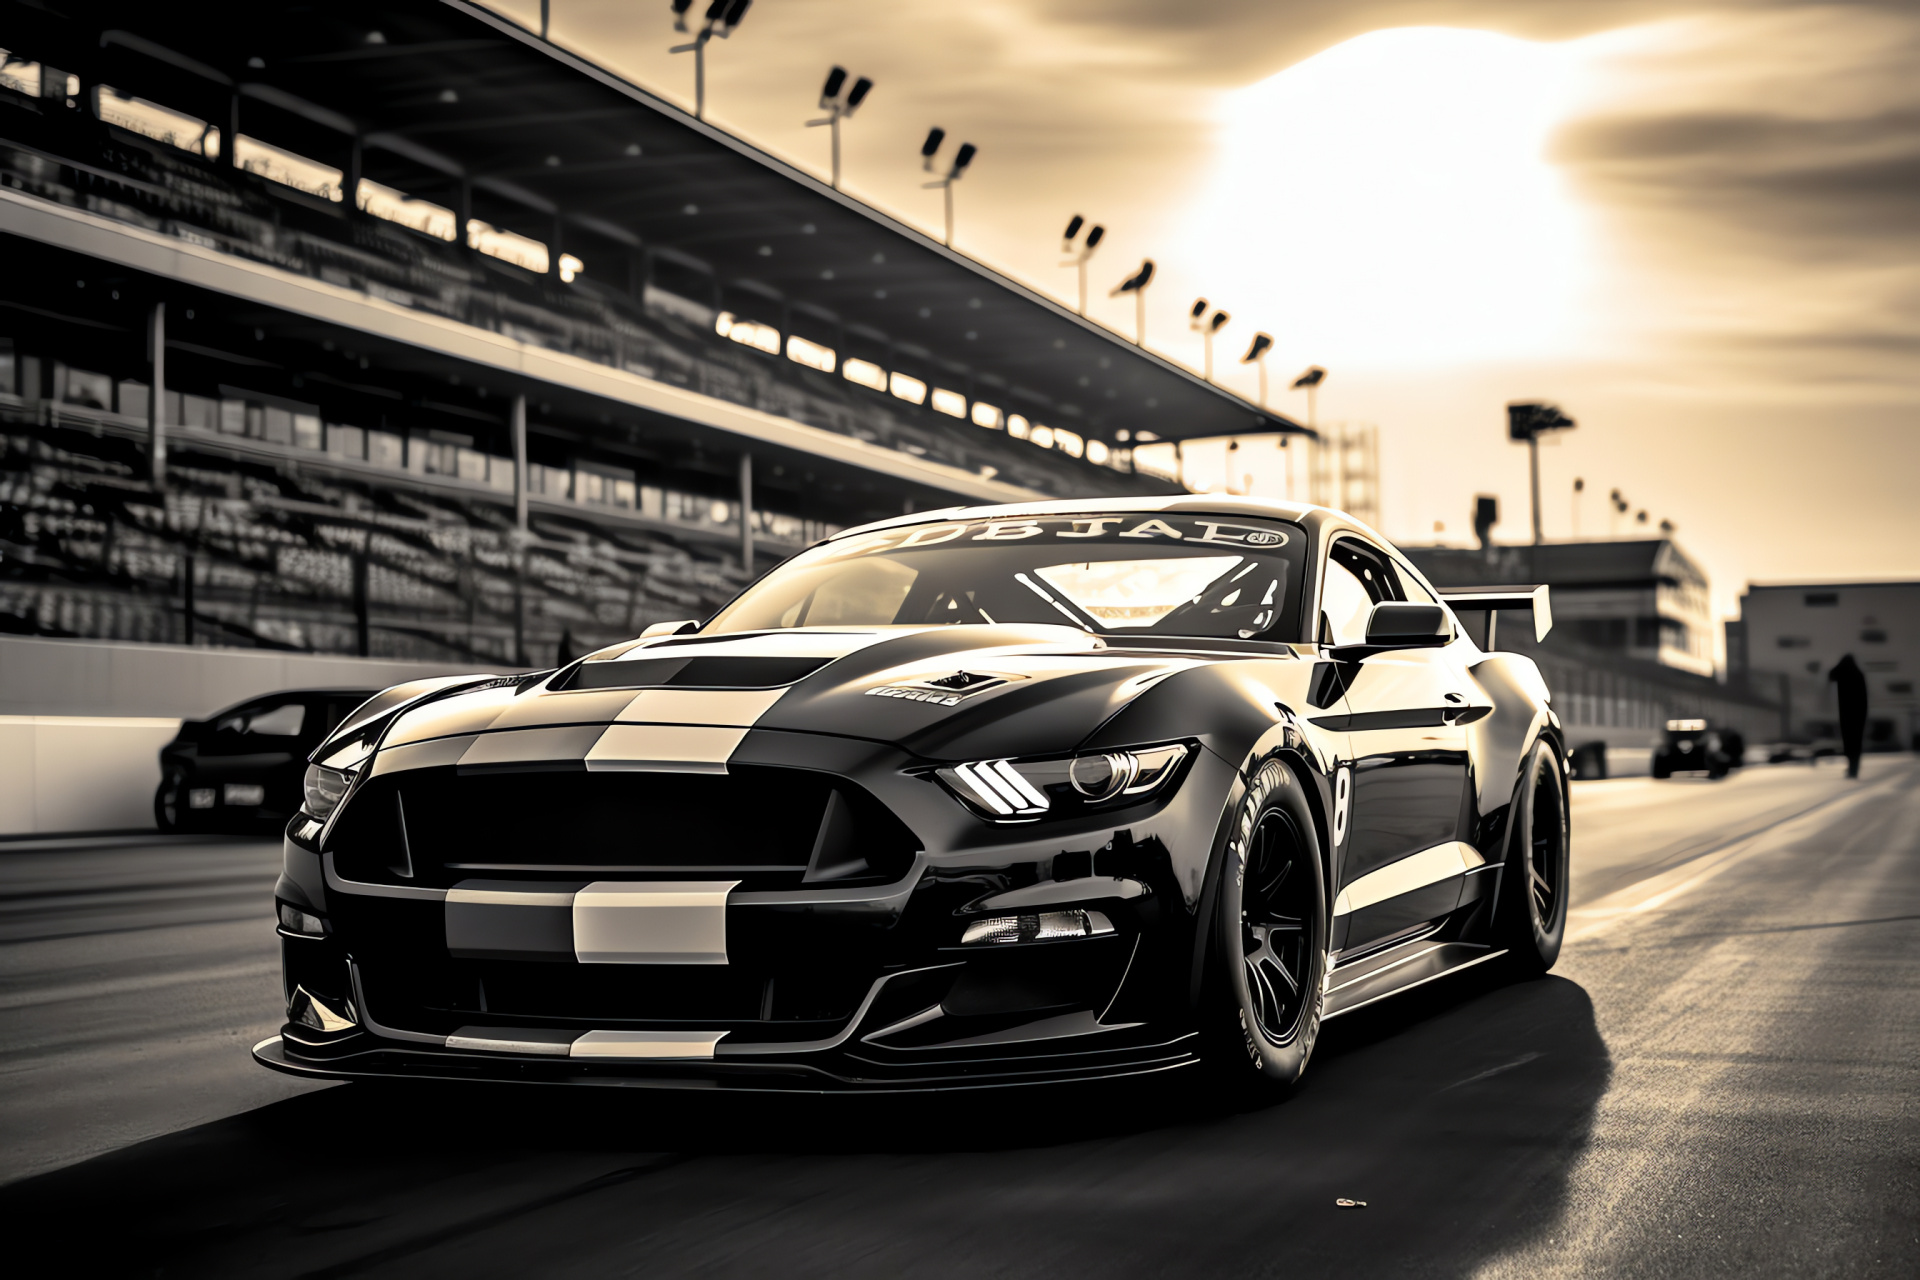 Ford Mustang GT4, Racing tradition, Indianapolis thrill, Performance engineering, Iconic Speedway vista, HD Desktop Wallpaper